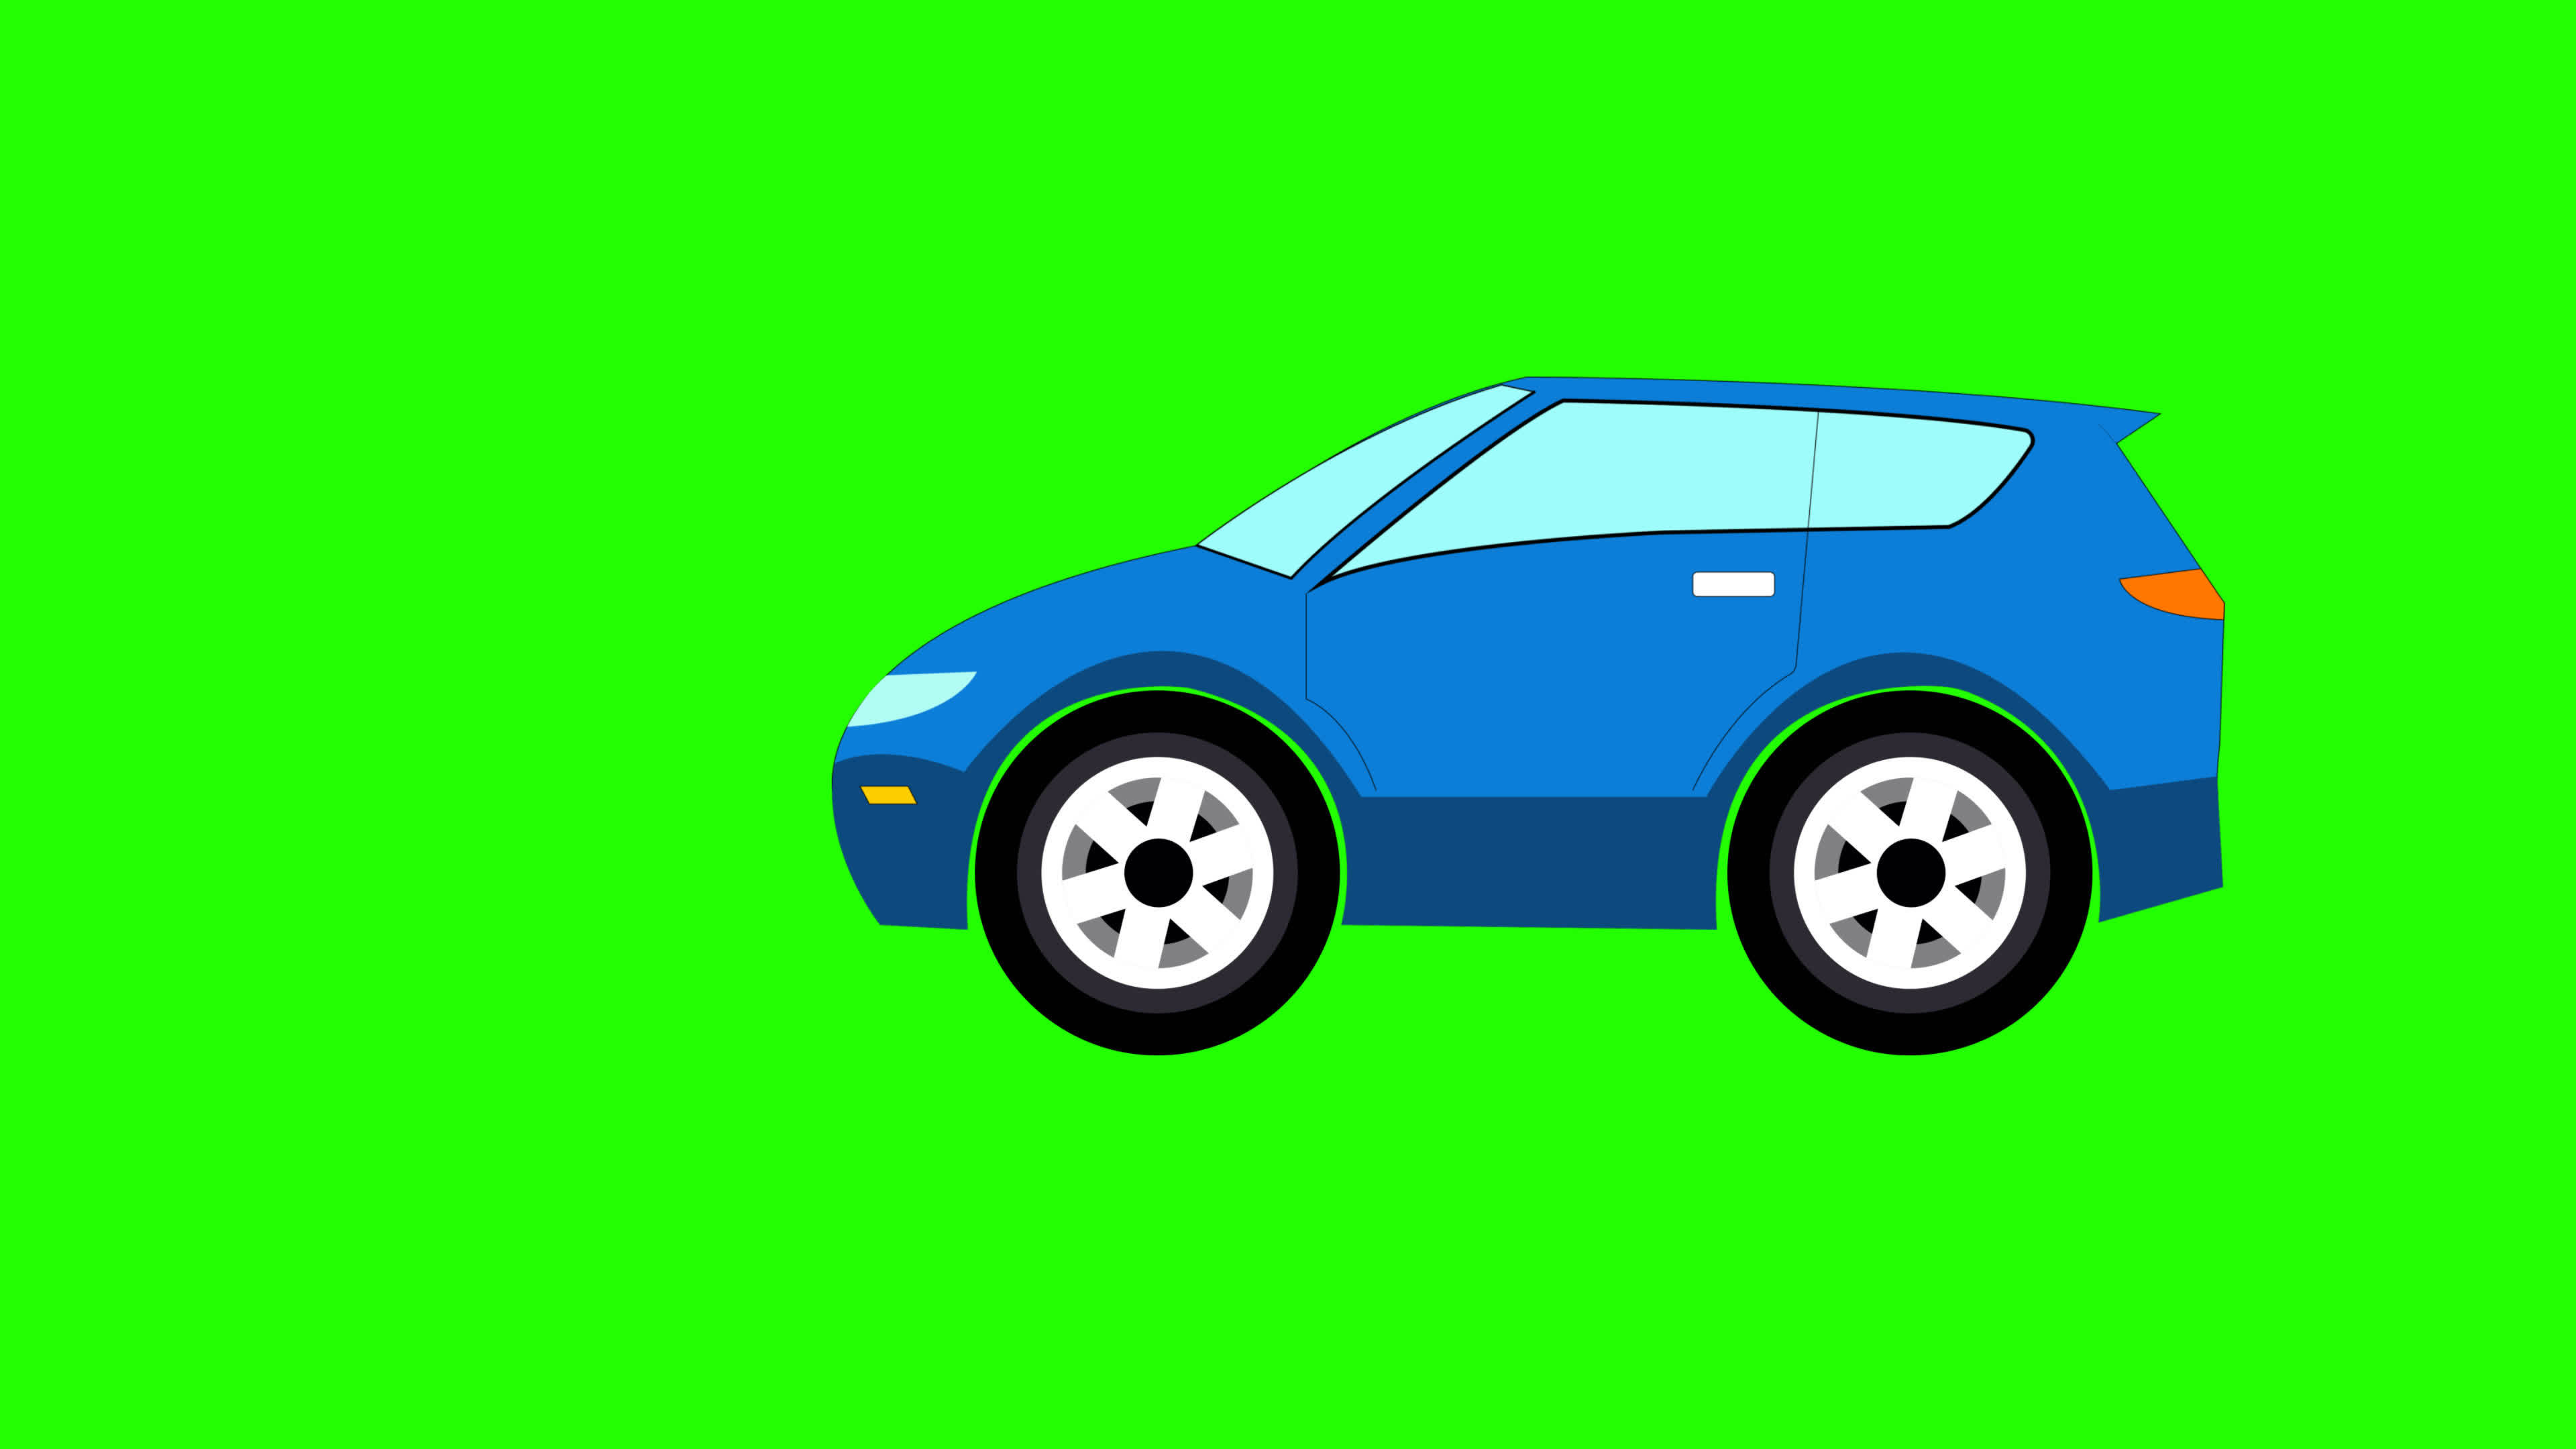 Green Screen Car Stock Video Footage for Free Download